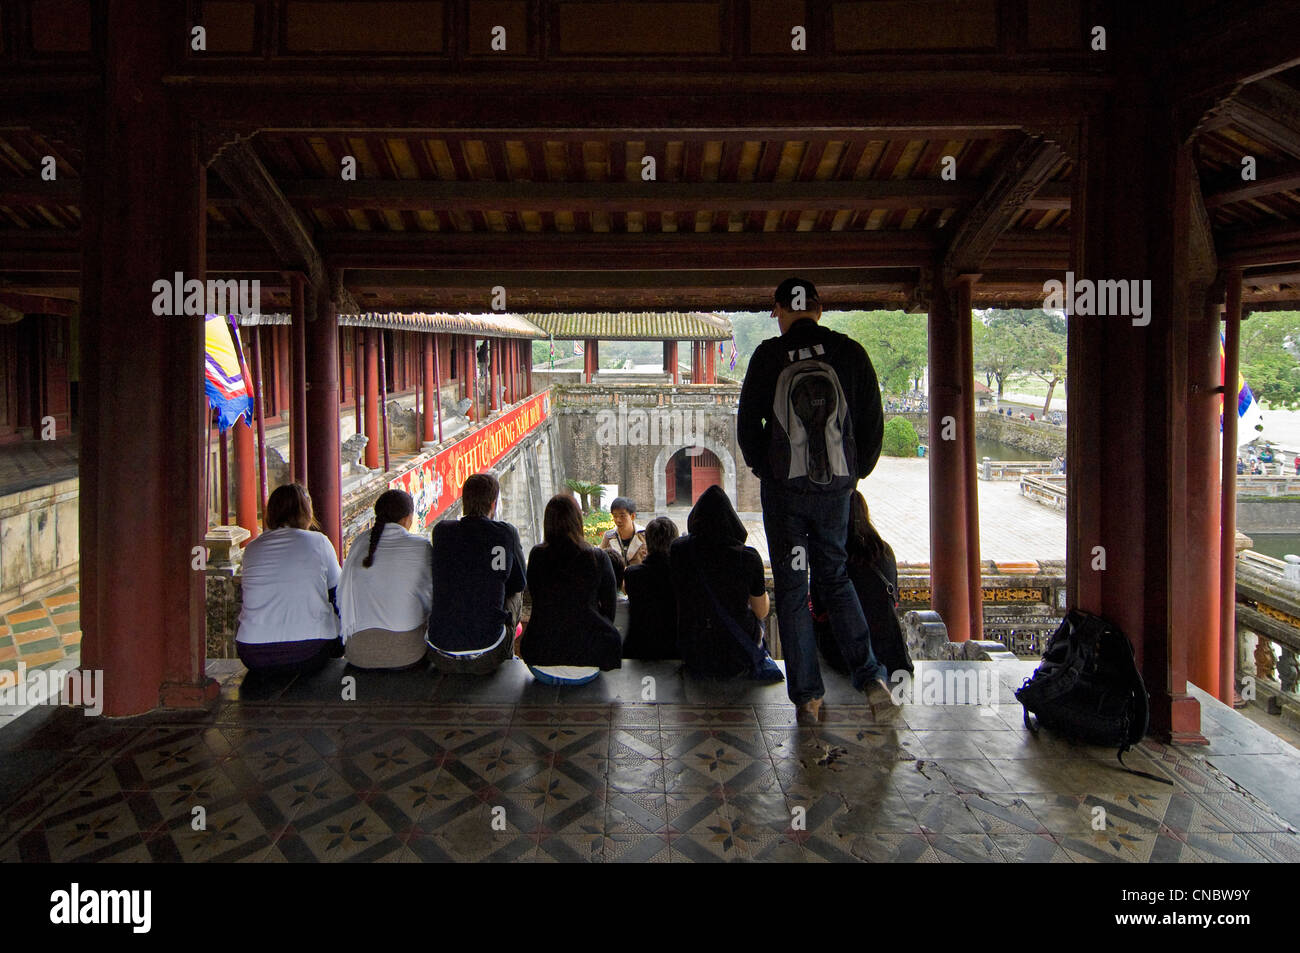 Horizontal view of a guide with tourist group sitting in the Lau Ngu Phung, Five-Phoenix Pavilion at the Imperial Palace in Hue, Vietnam Stock Photo